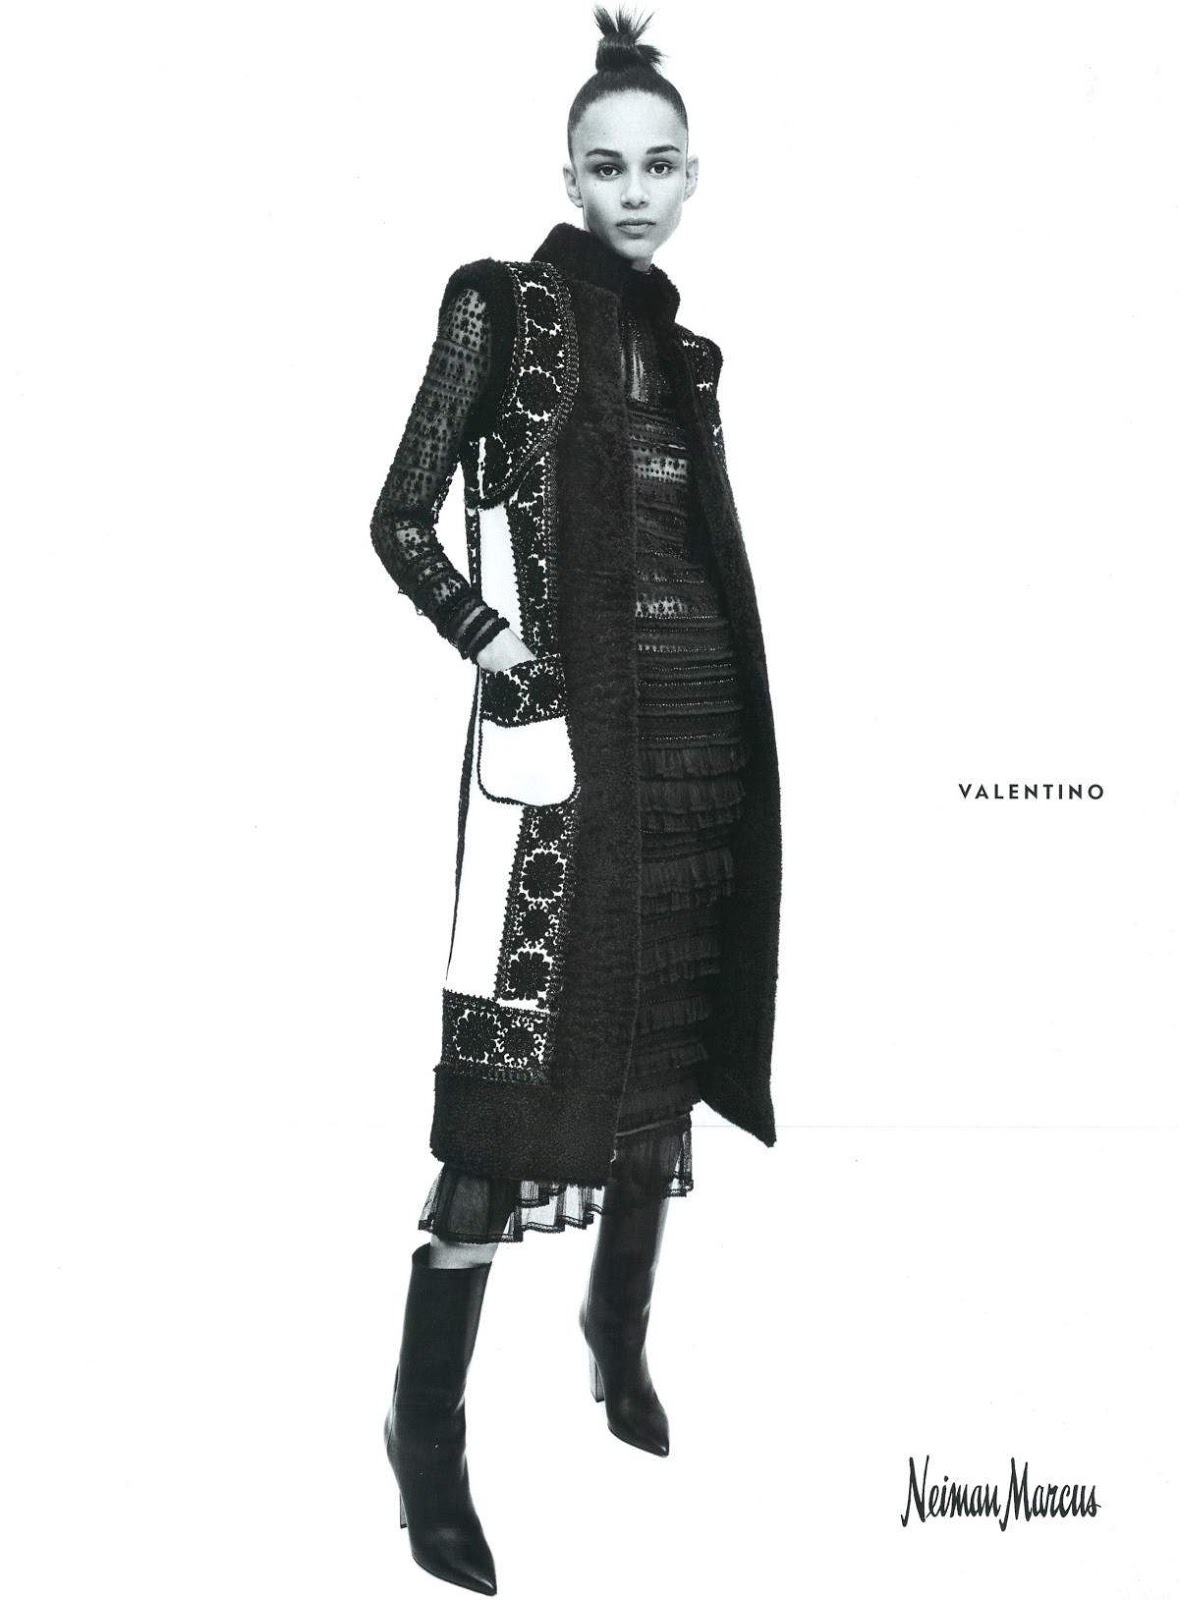 The Essentialist - Fashion Advertising Updated Daily: Neiman Marcus Ad ...